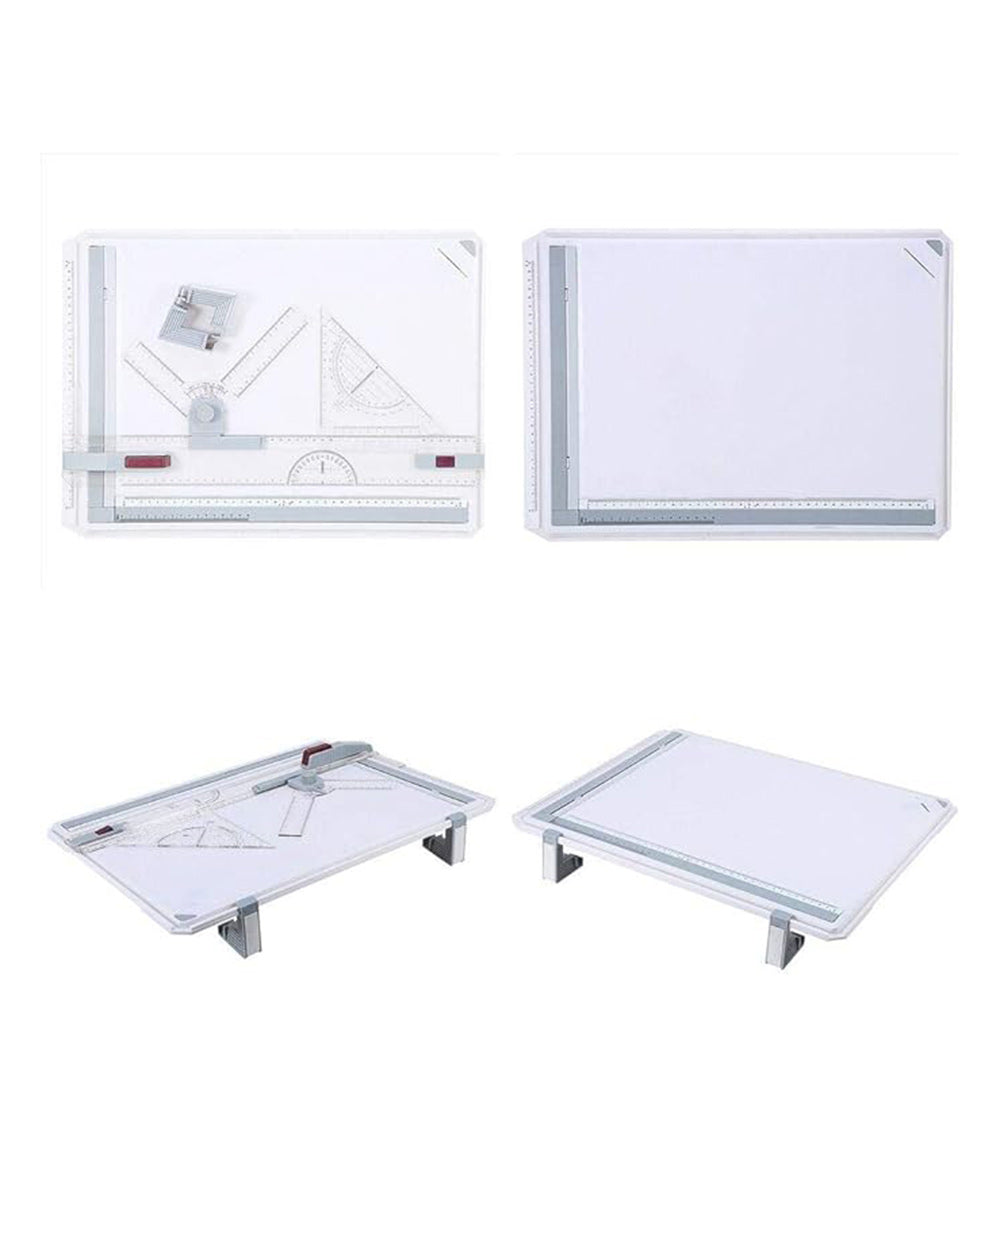 RUNMIND A3 Multifunctional Drawing Board Drafting Table